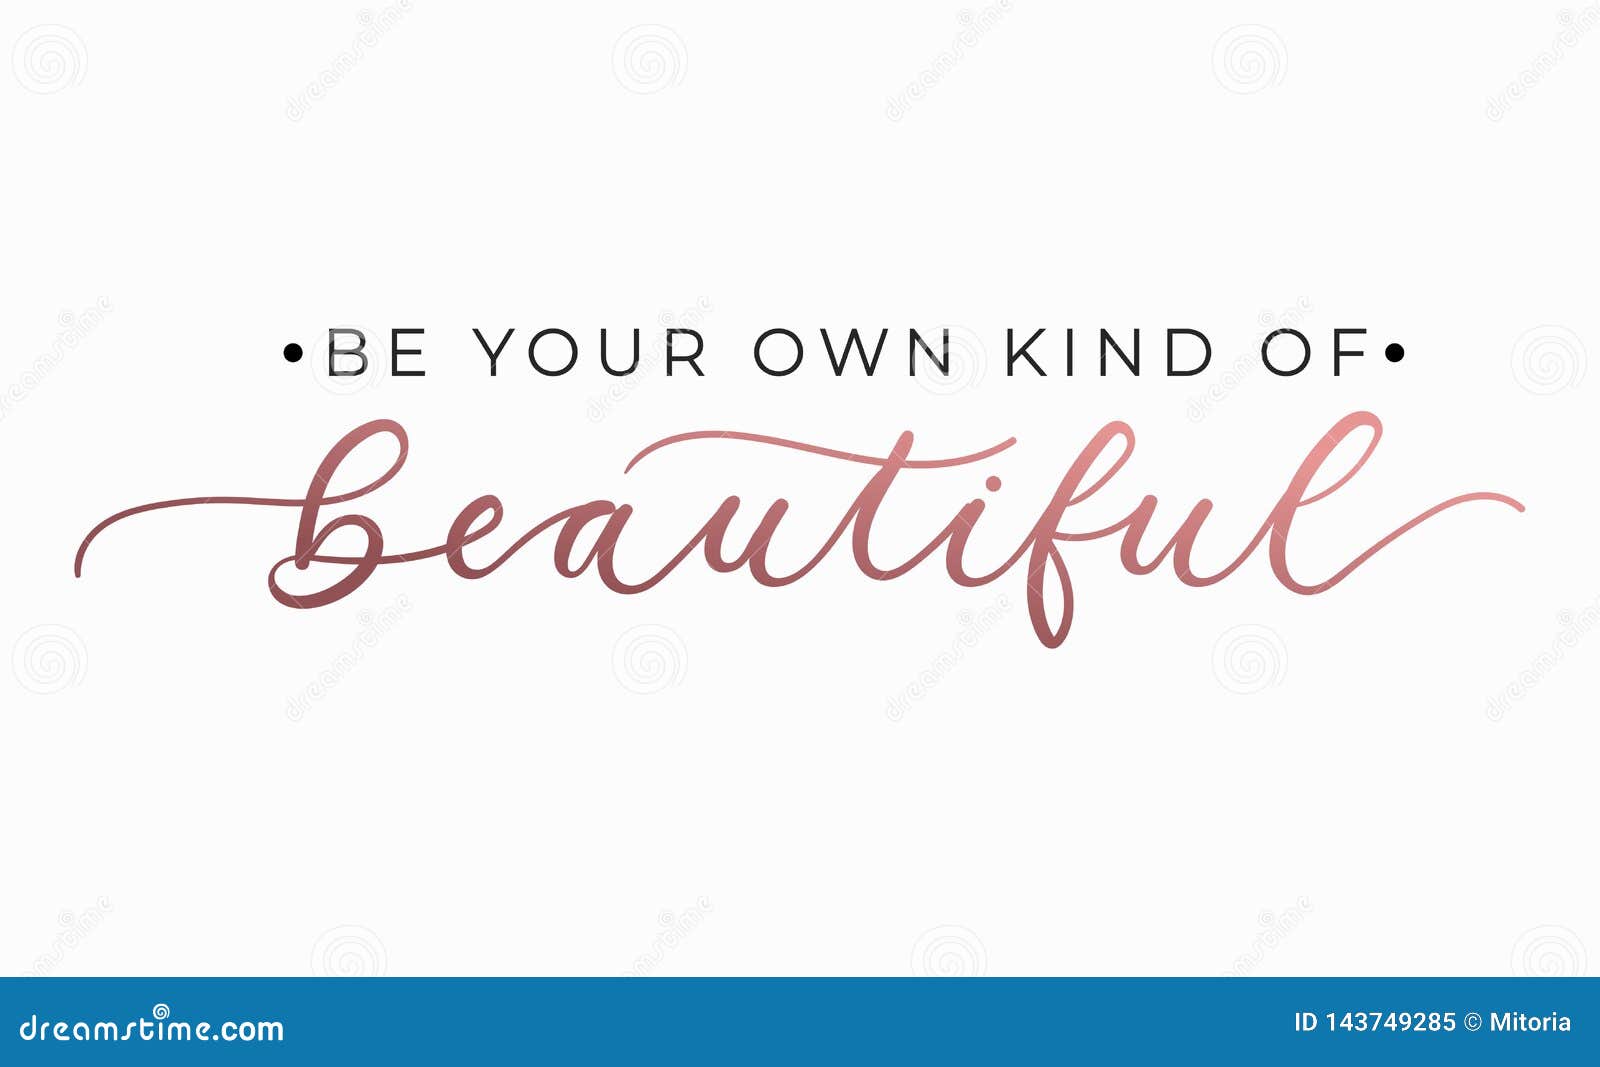 be your own kind of beautiful inspirational quote with lettering.  motivational 